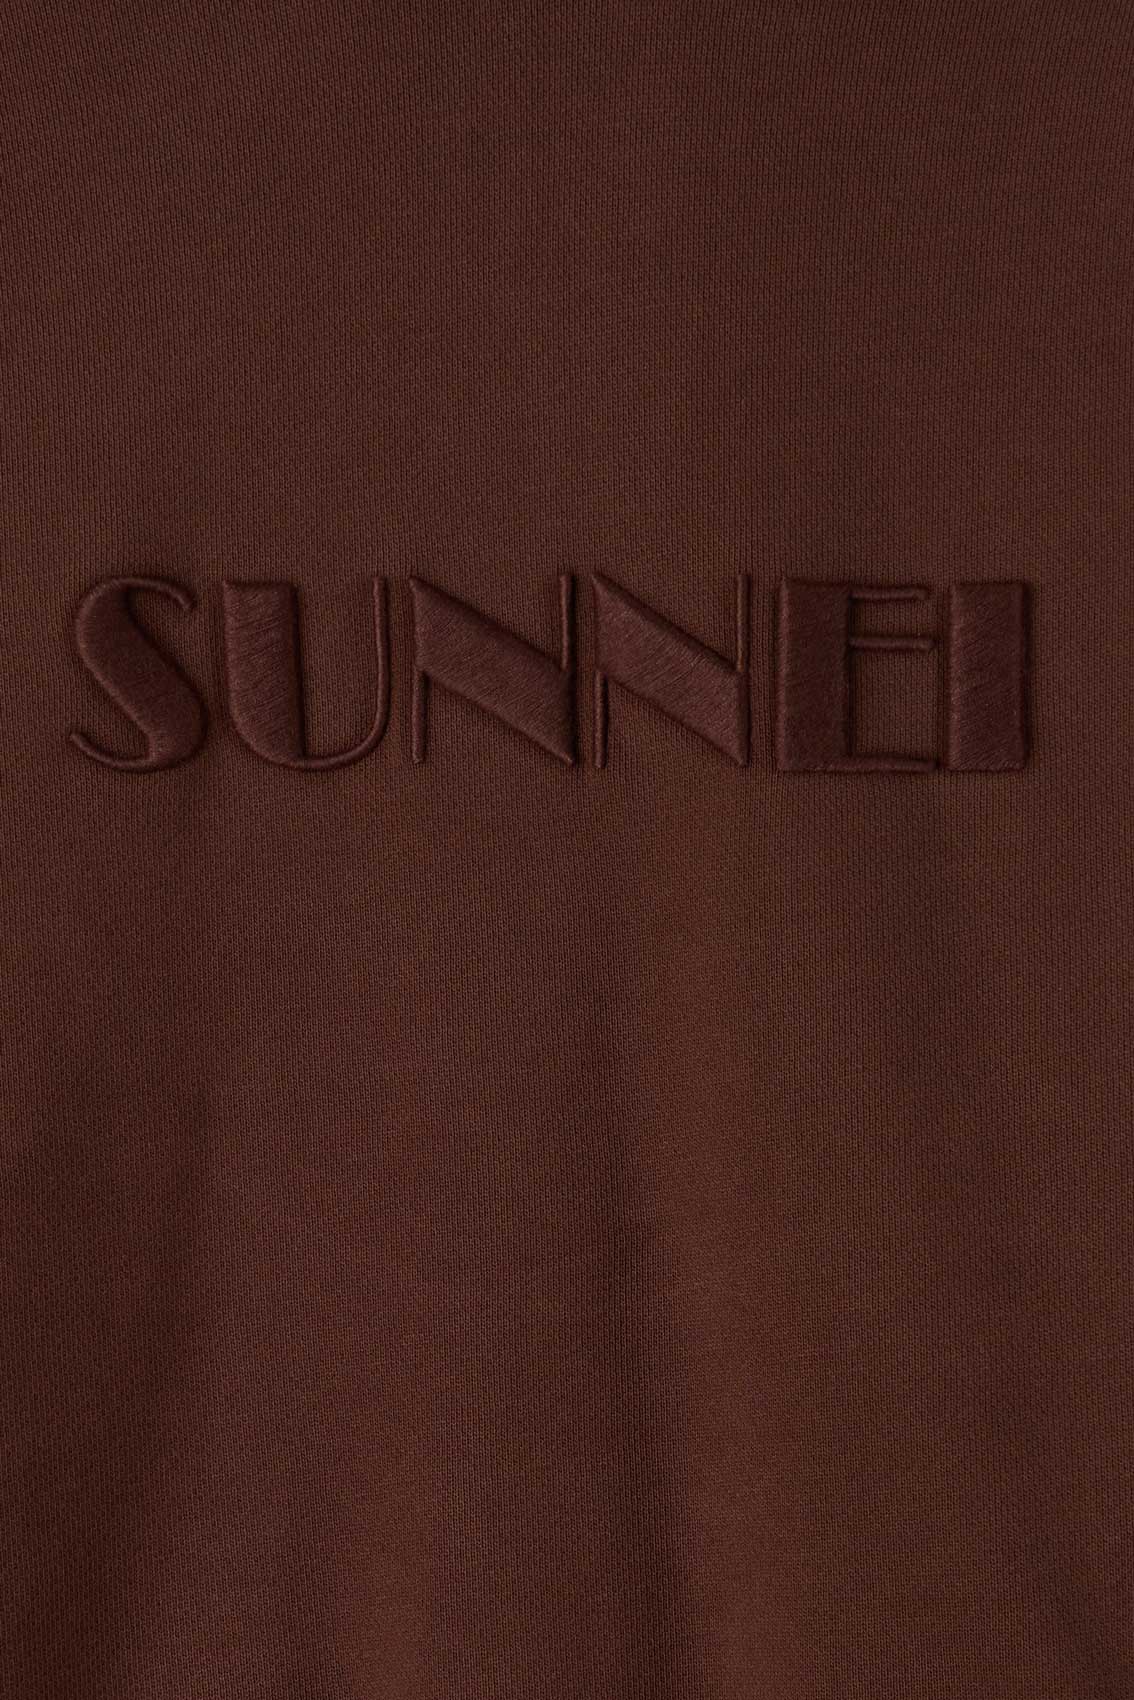 EMBROIDERED HOODIE / brown